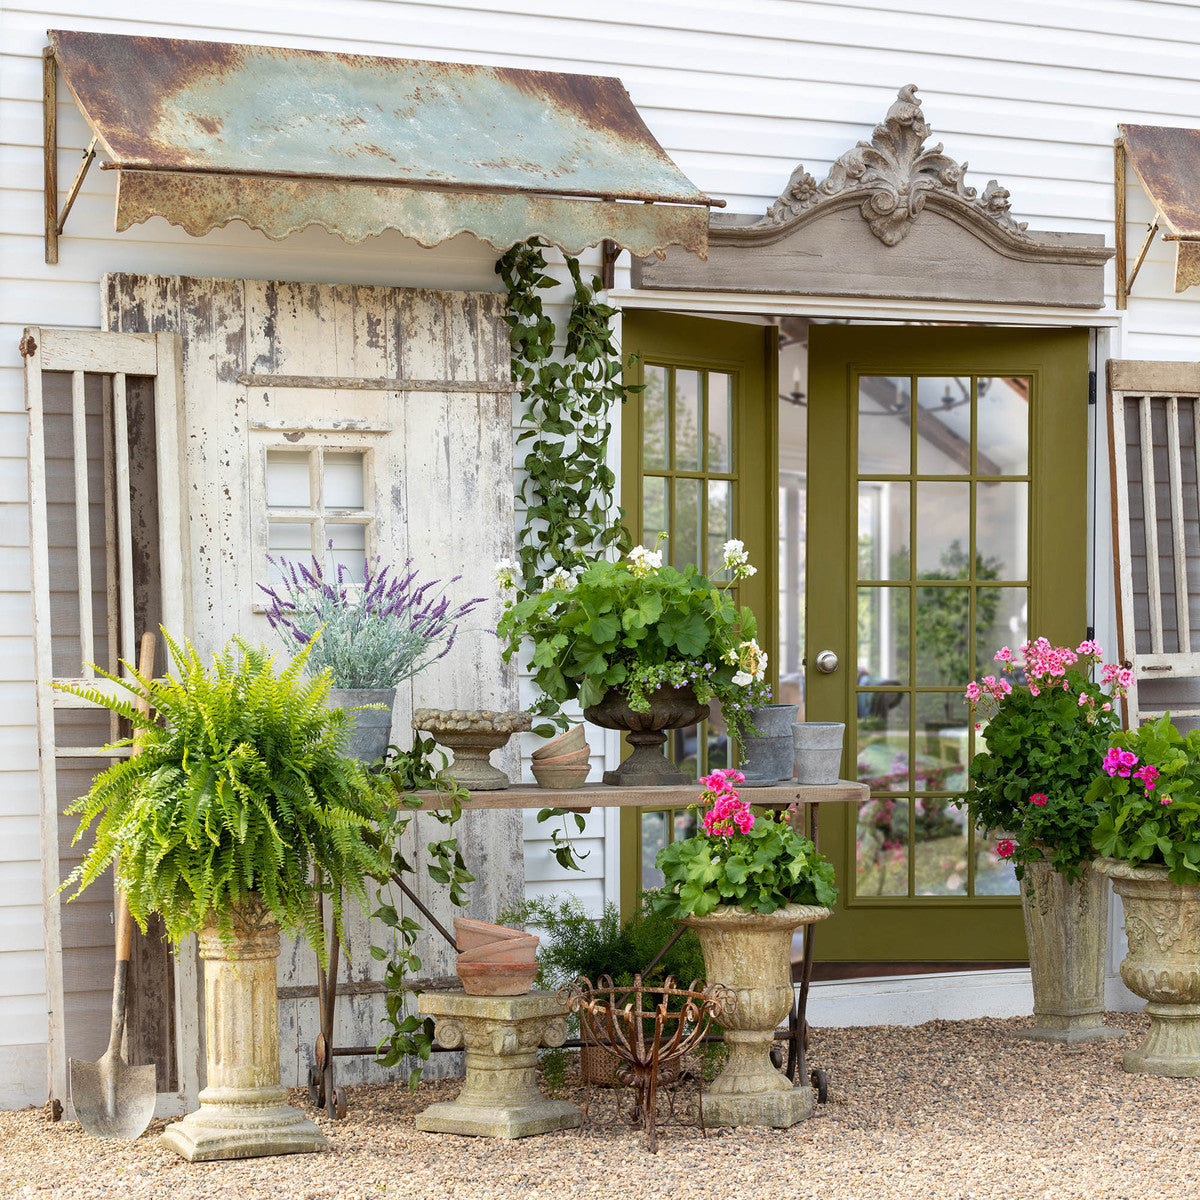 decorative-wood-pediment-outside-decor-on-garden-shed-over-green-door-with-plants